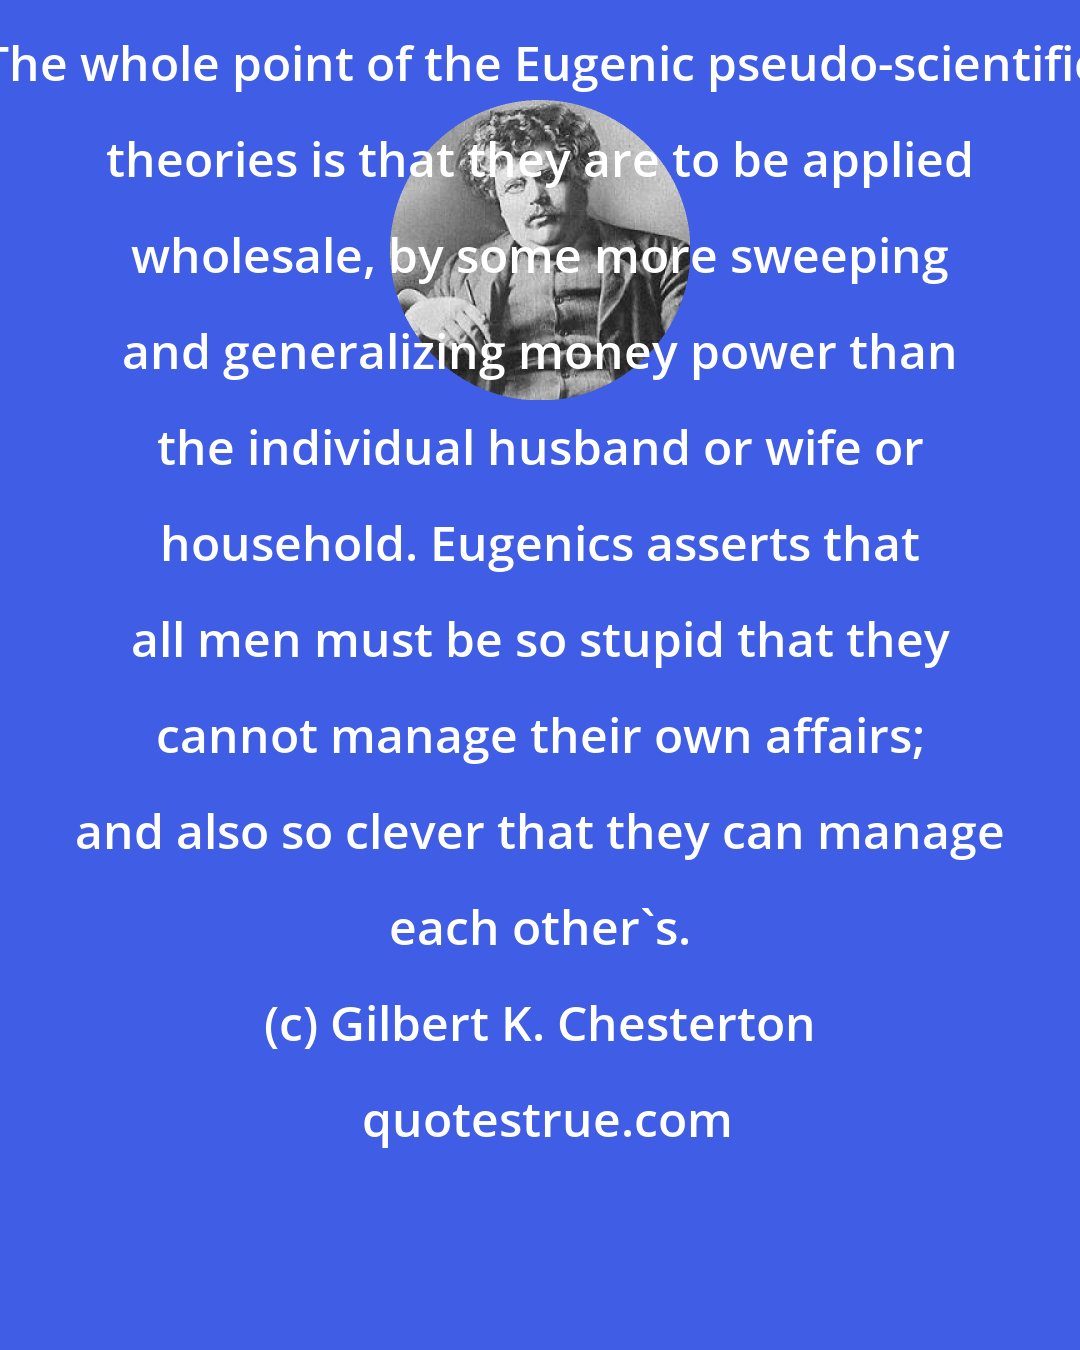 Gilbert K. Chesterton: The whole point of the Eugenic pseudo-scientific theories is that they are to be applied wholesale, by some more sweeping and generalizing money power than the individual husband or wife or household. Eugenics asserts that all men must be so stupid that they cannot manage their own affairs; and also so clever that they can manage each other's.